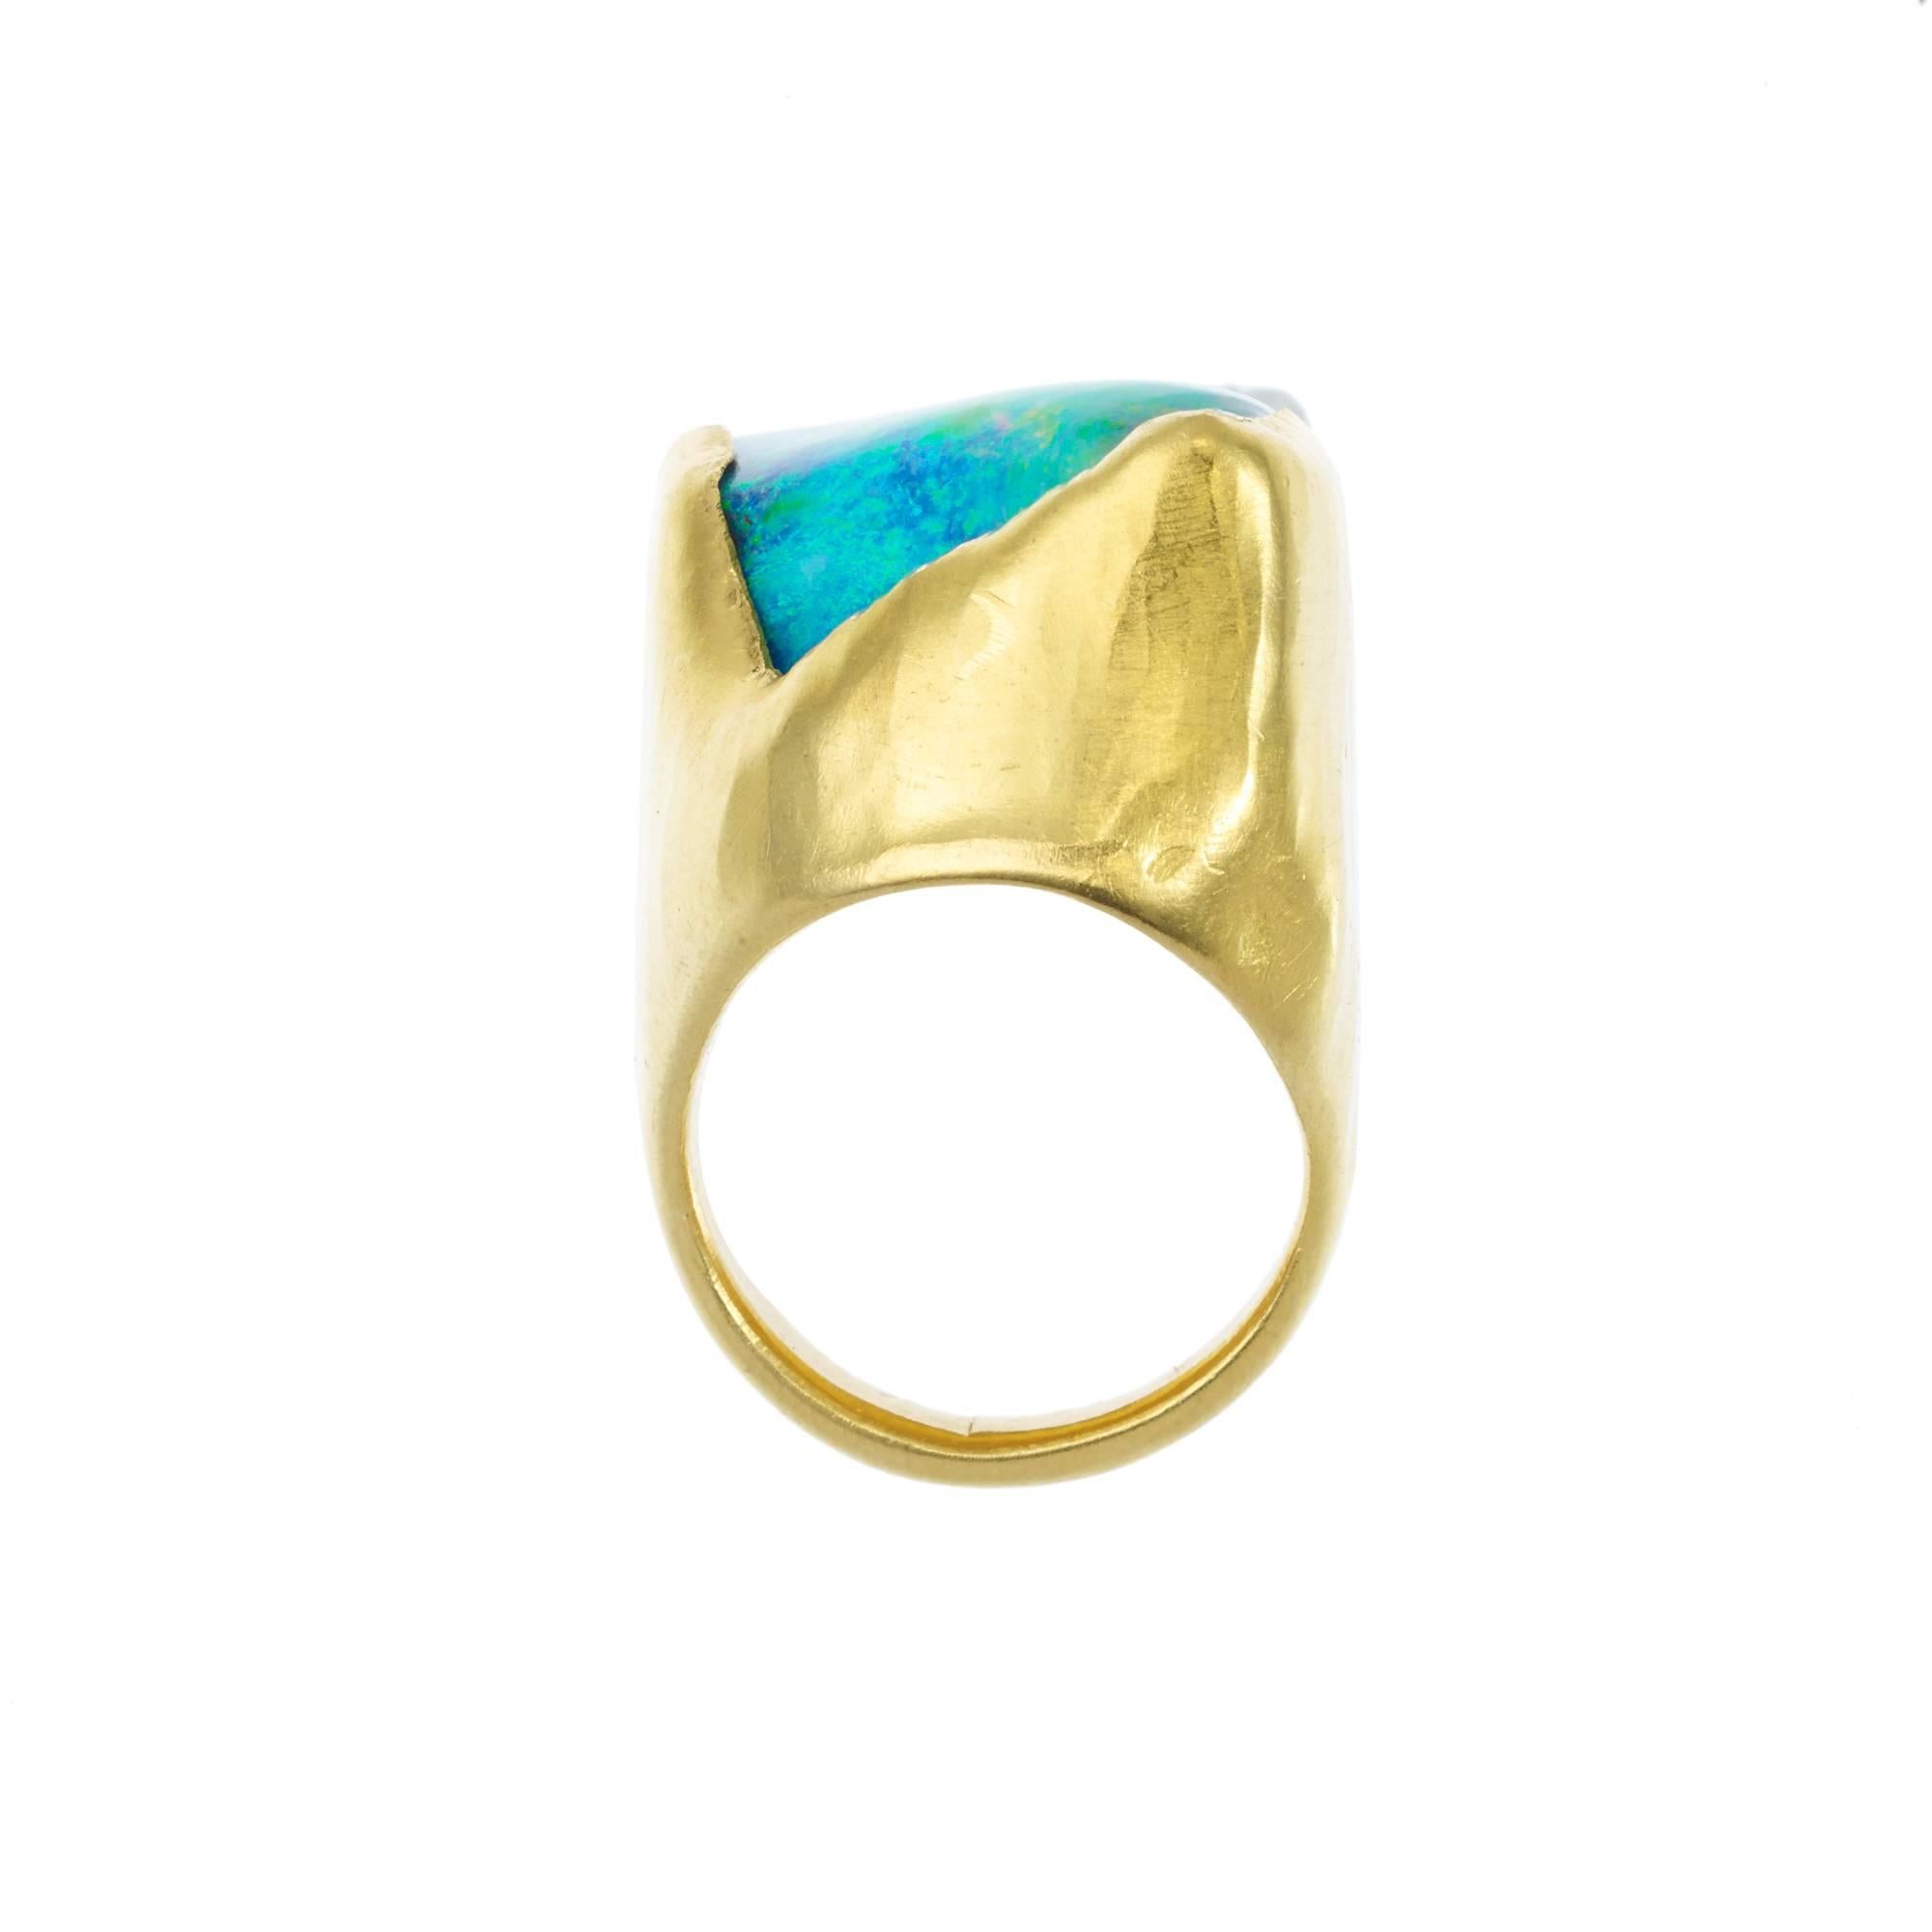 In ancient times Opals were regarded as the luckiest and most magical of all the gems, more powerful than all the other stones as it contained an endlessly fascinating array of colours.<p>
Inspired by an old Gold and Turquoise ring which Pippa